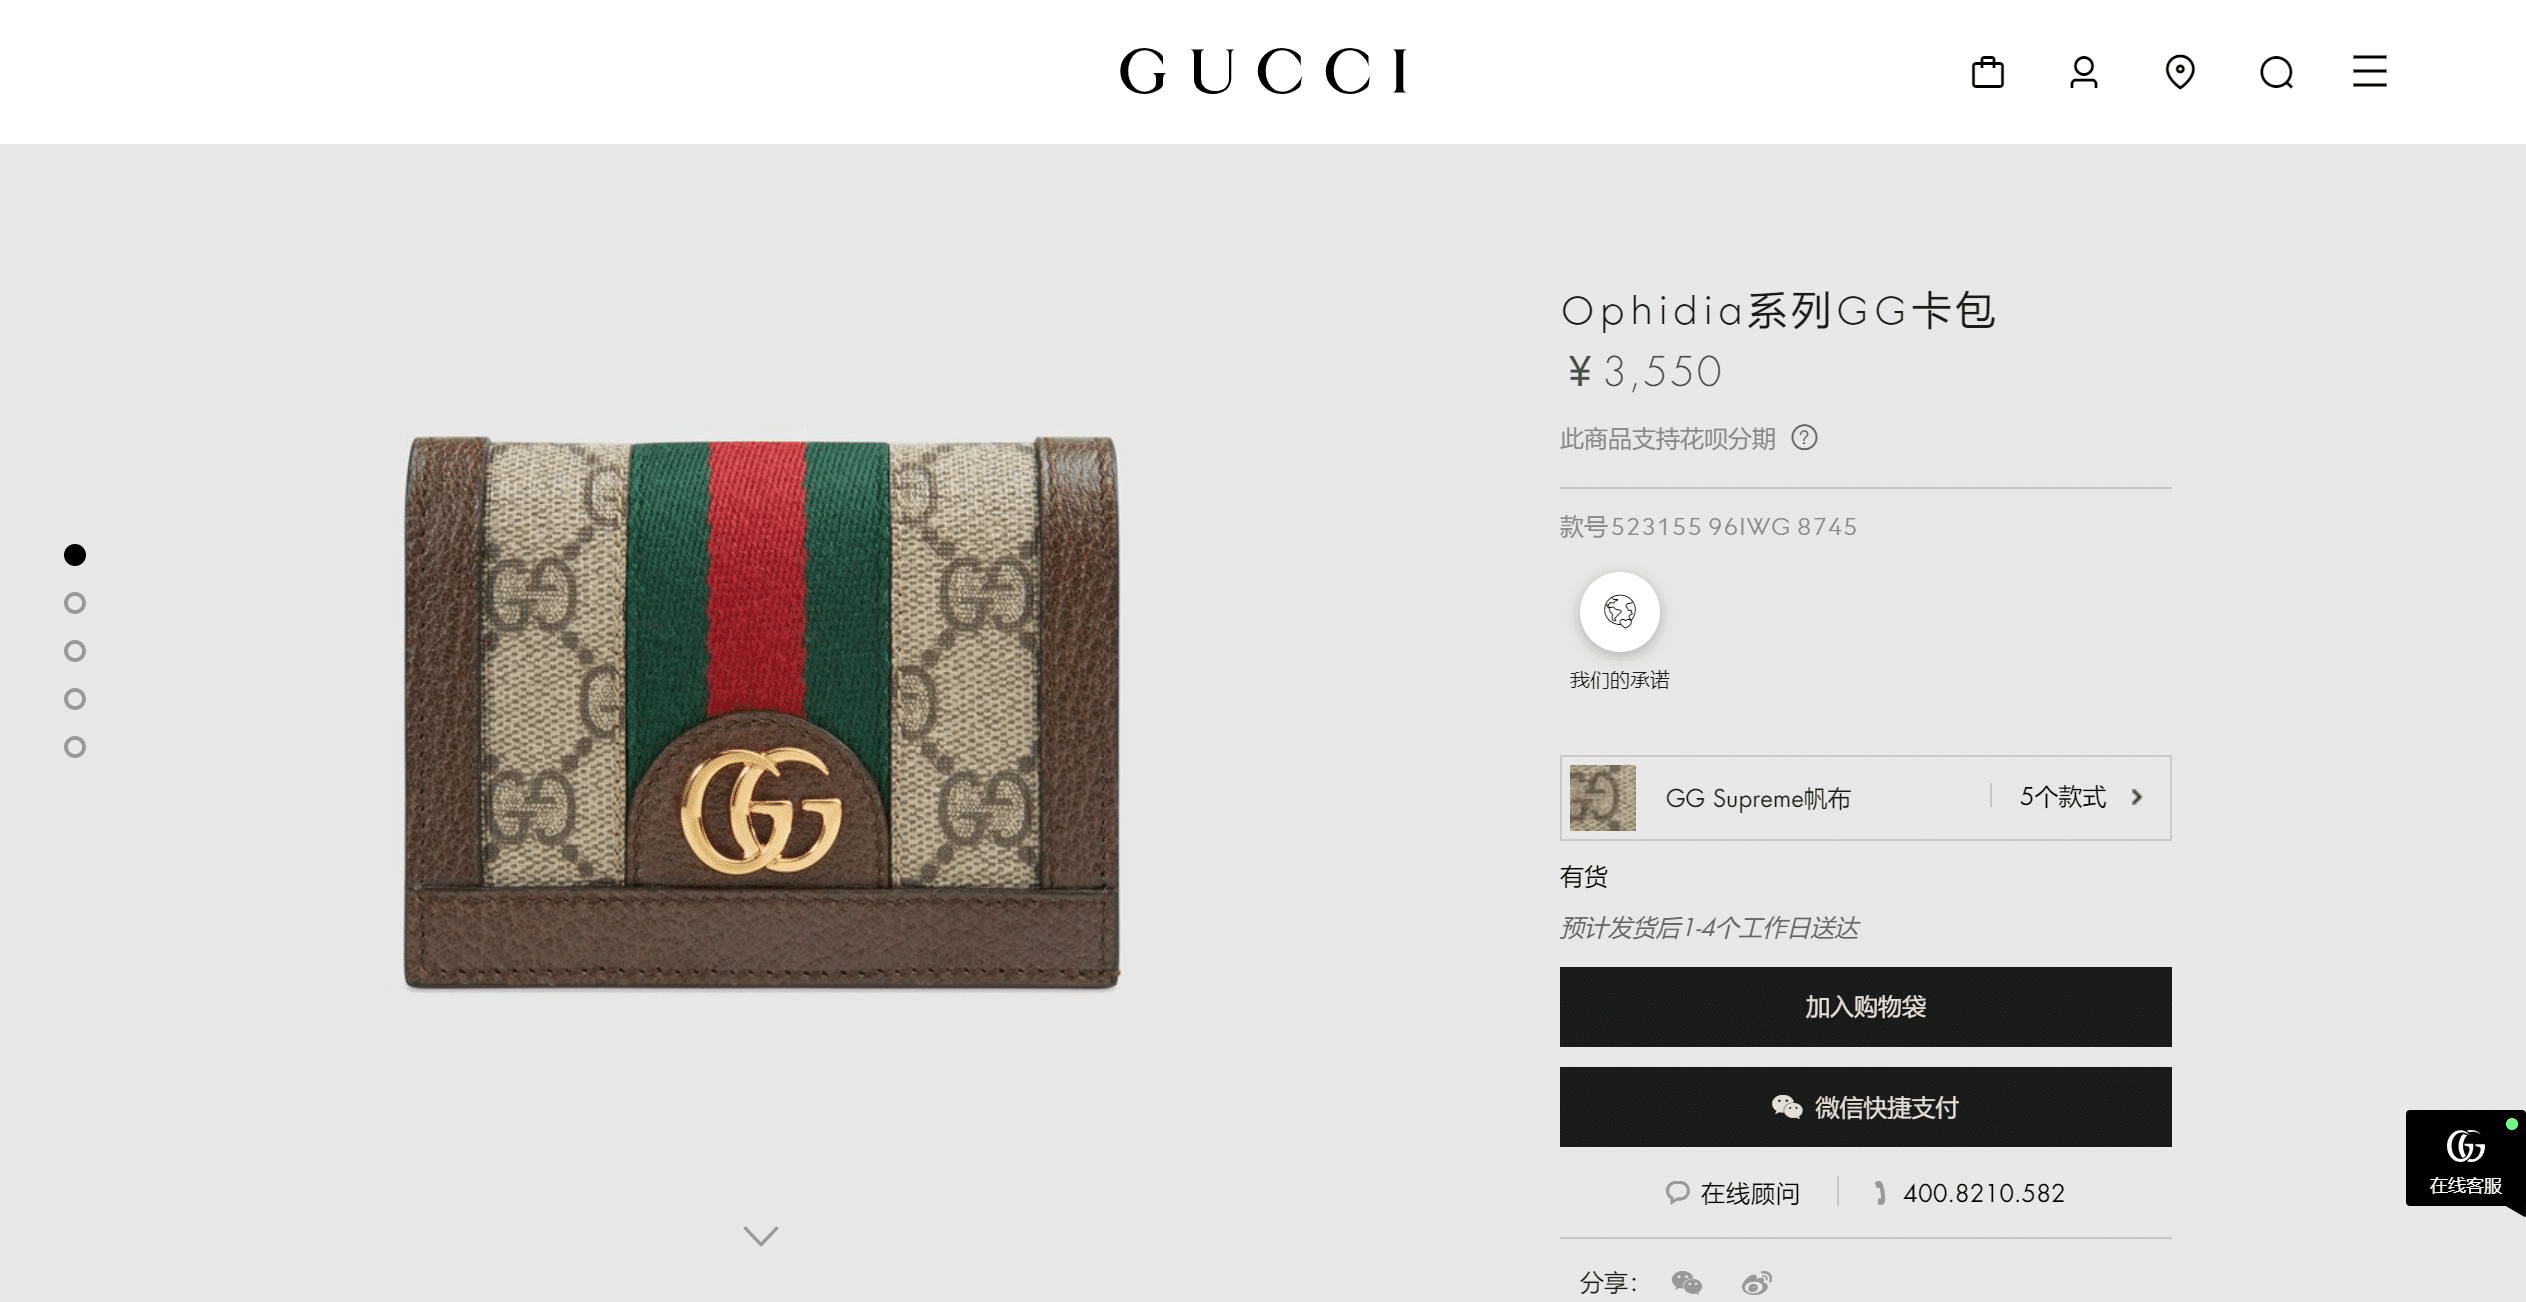 GG-SupremeOphidiaGG-GUCCI.png